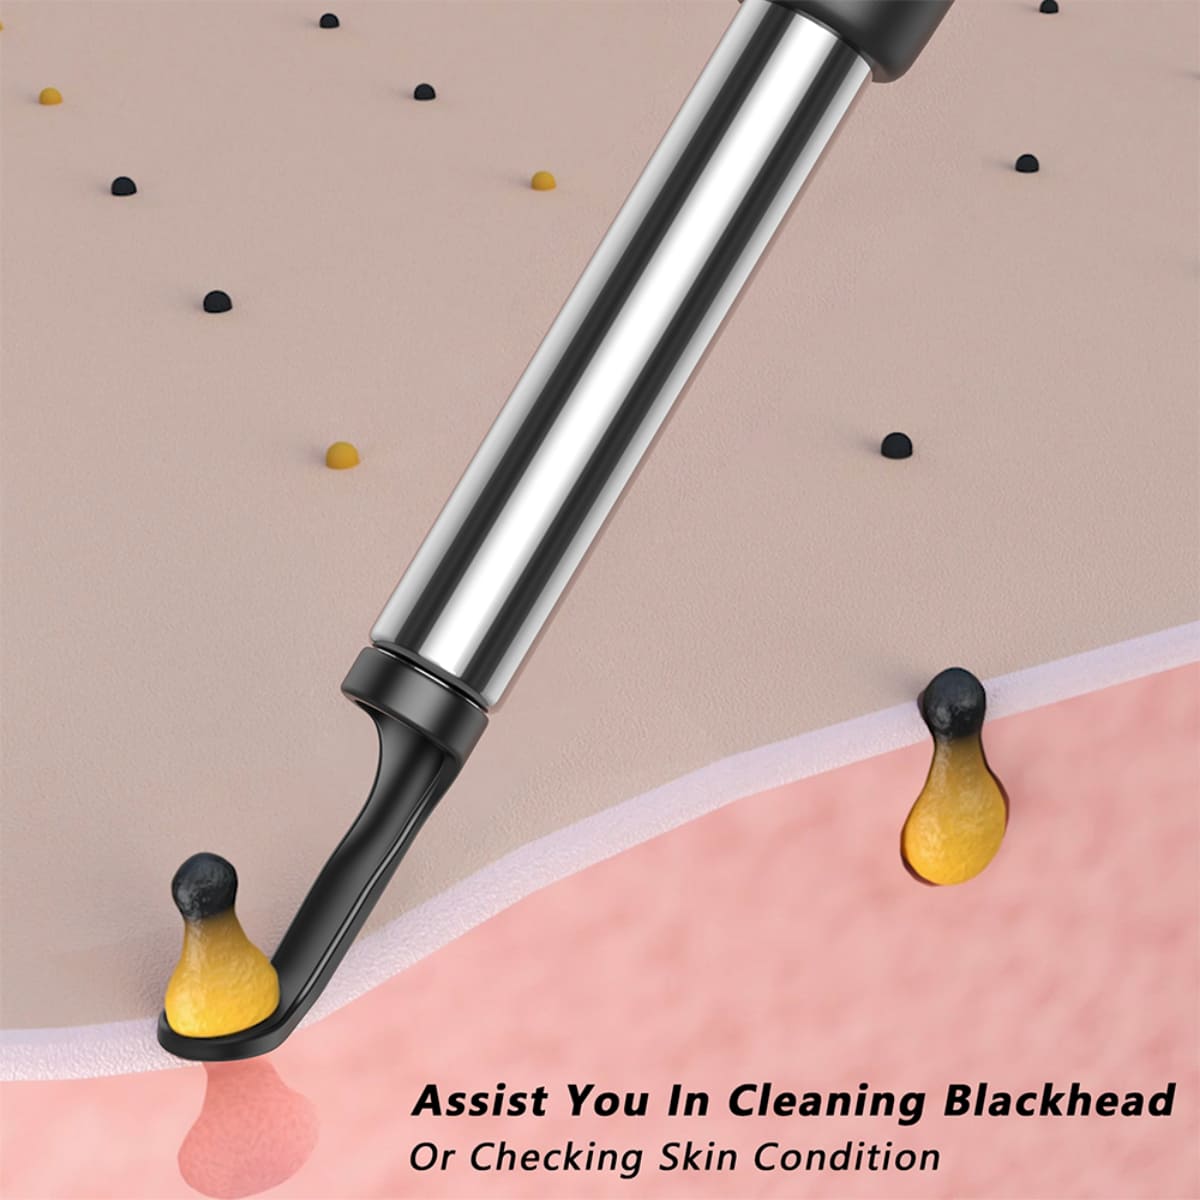 Skin cleansing attachment (blackhead removal) for cleanser